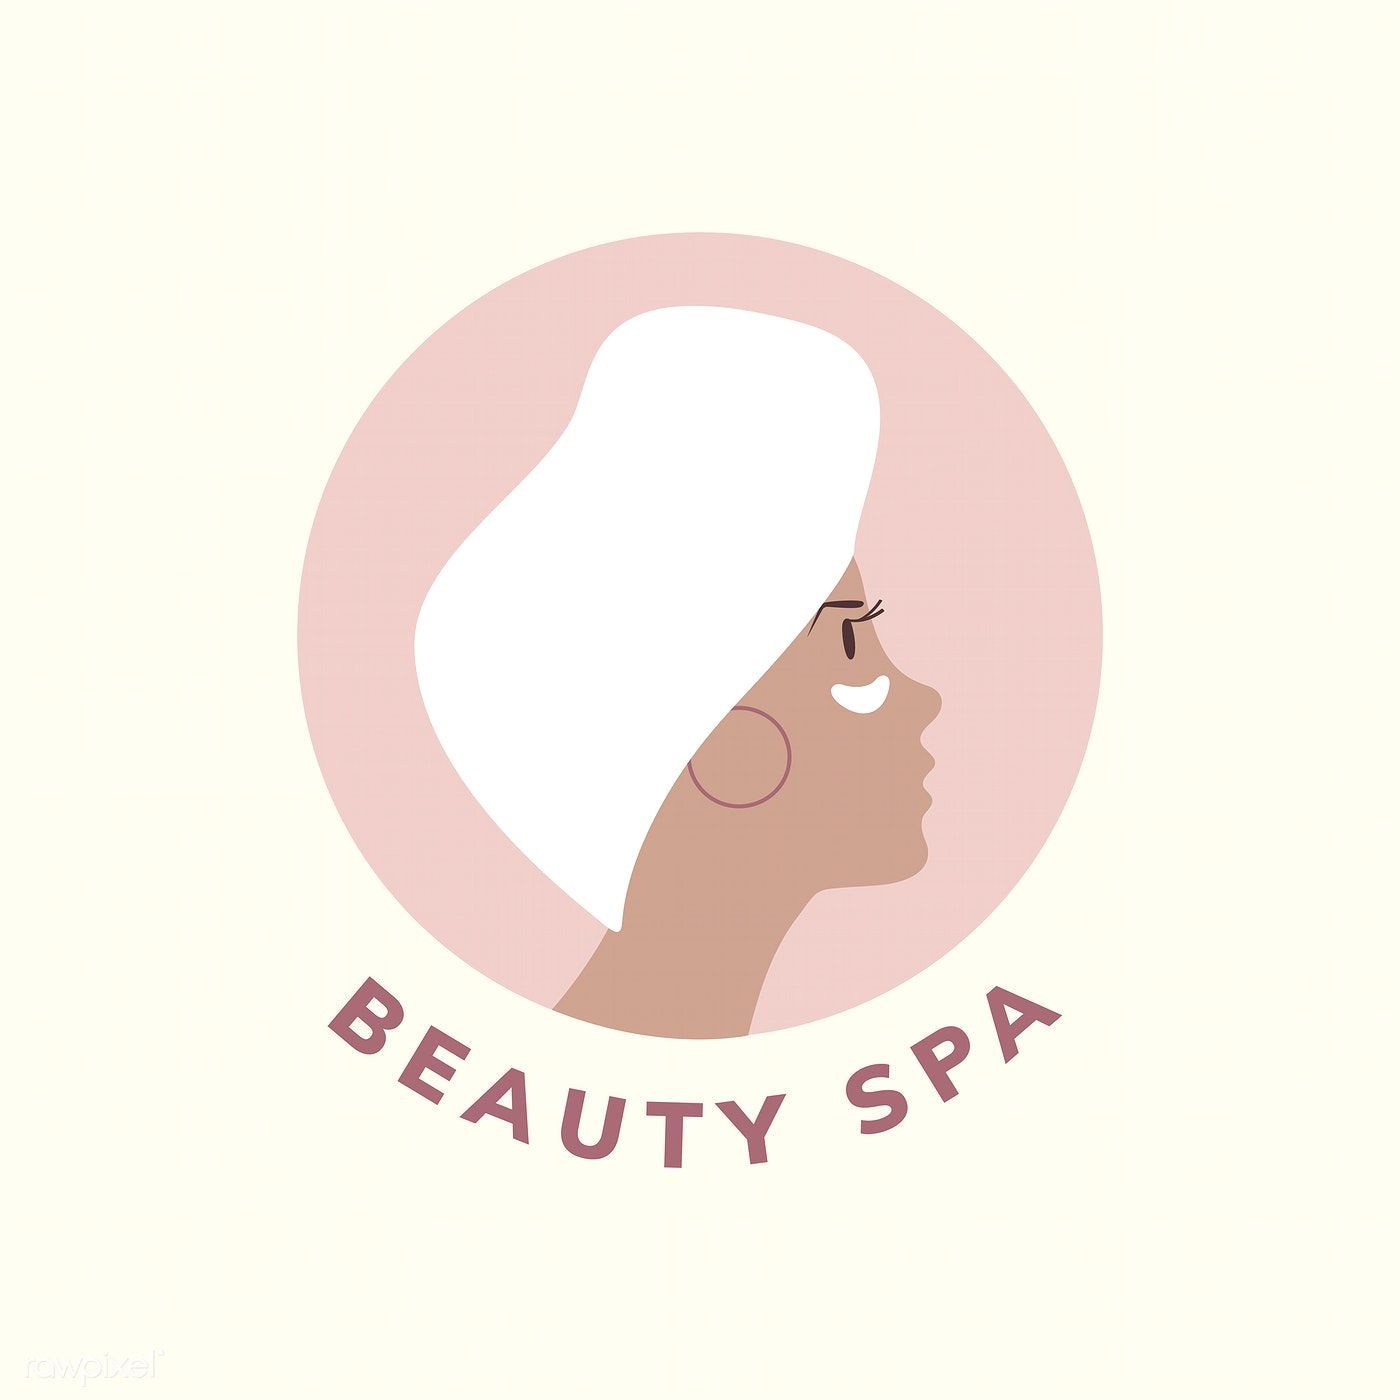 Download free vector of Spa and beauty icon vector 473025 - Download free vector of Spa and beauty icon vector 473025 -   13 beauty Icon free ideas